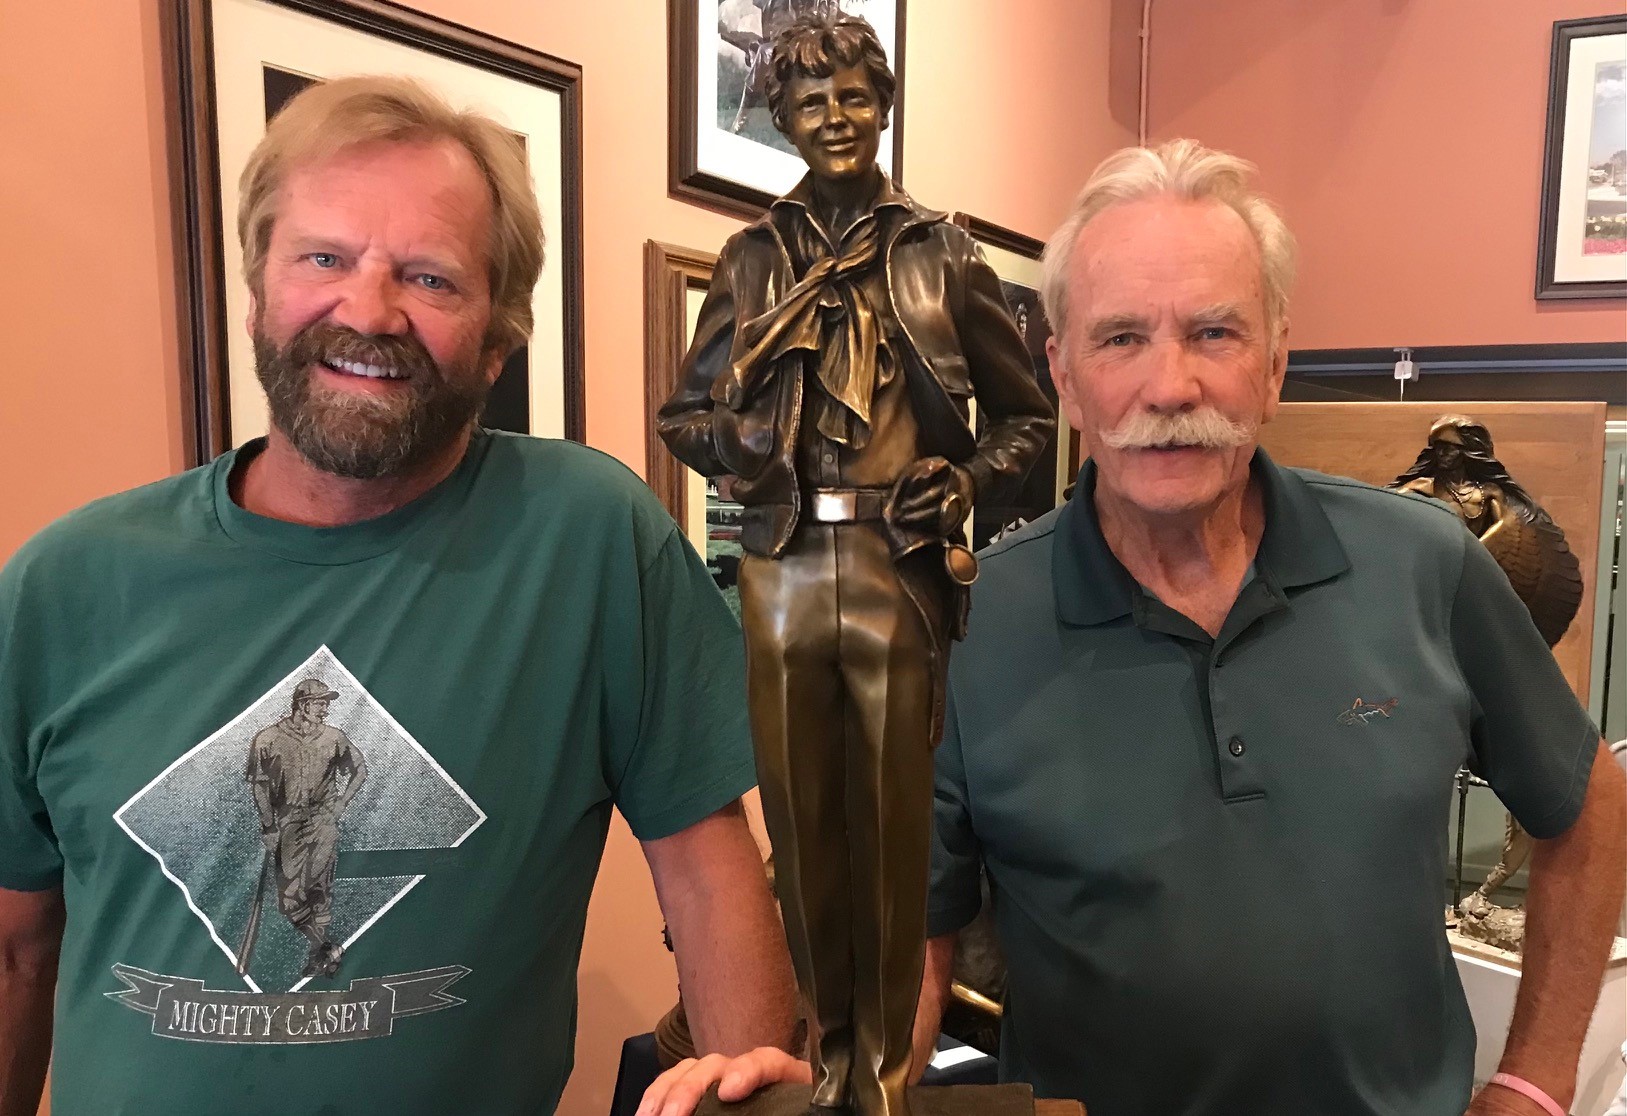 Earhart statue designed by sculptors Mark and George Lundeen.